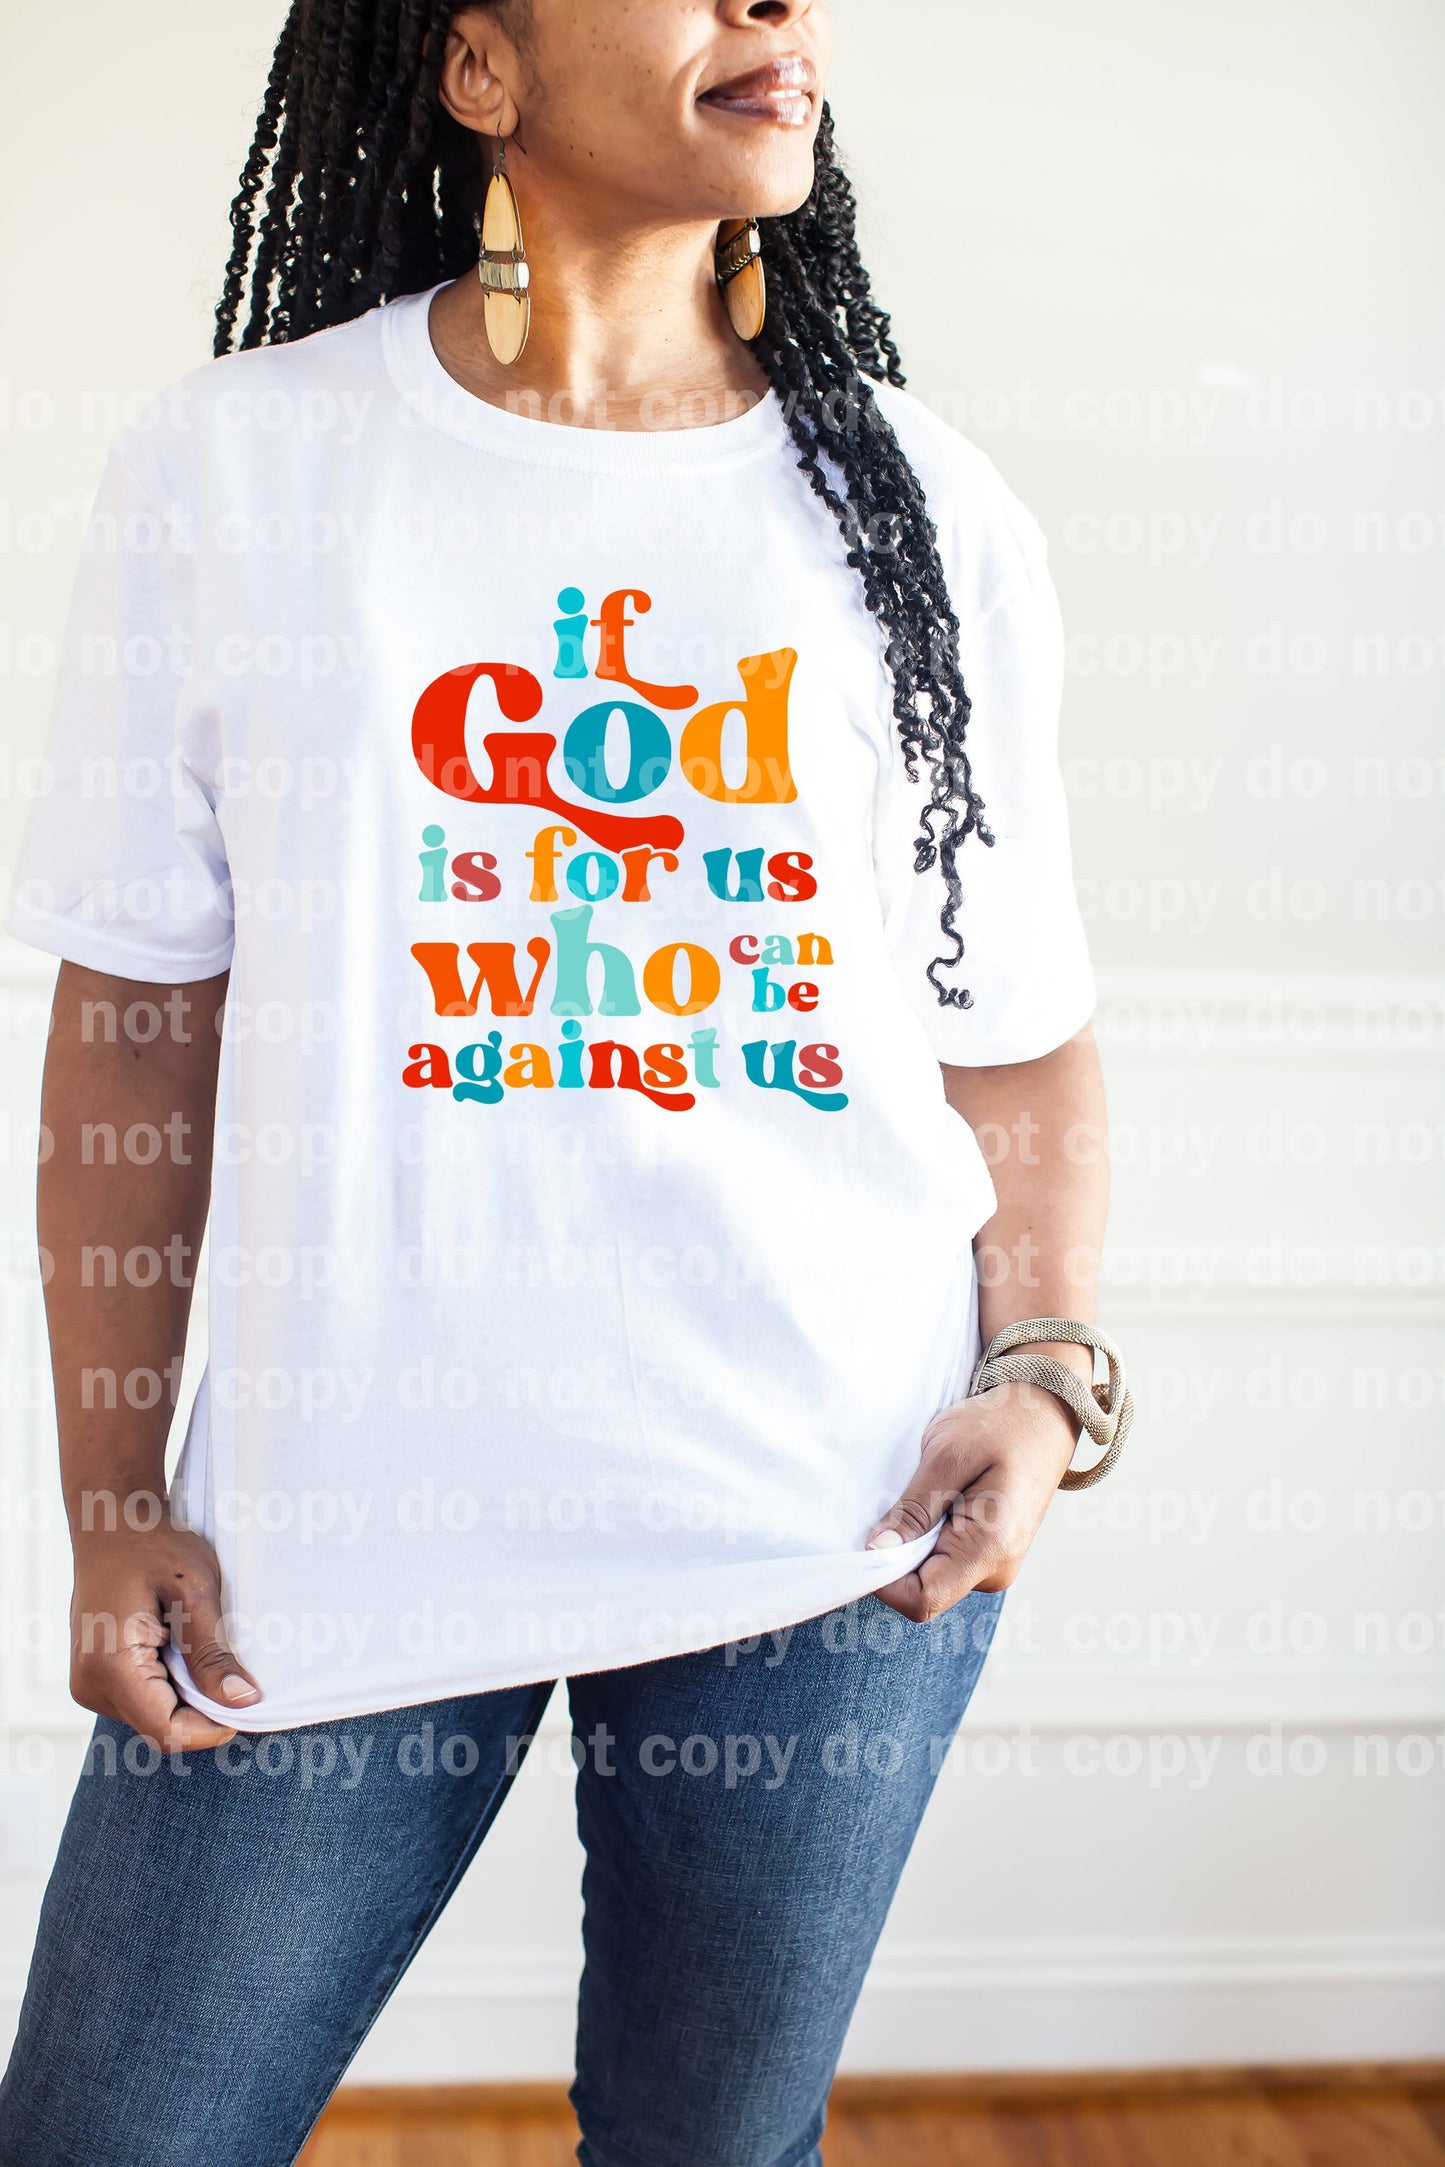 If God Is For Us Who Can Be Against Us Full Color/One Color Dream Print or Sublimation Print